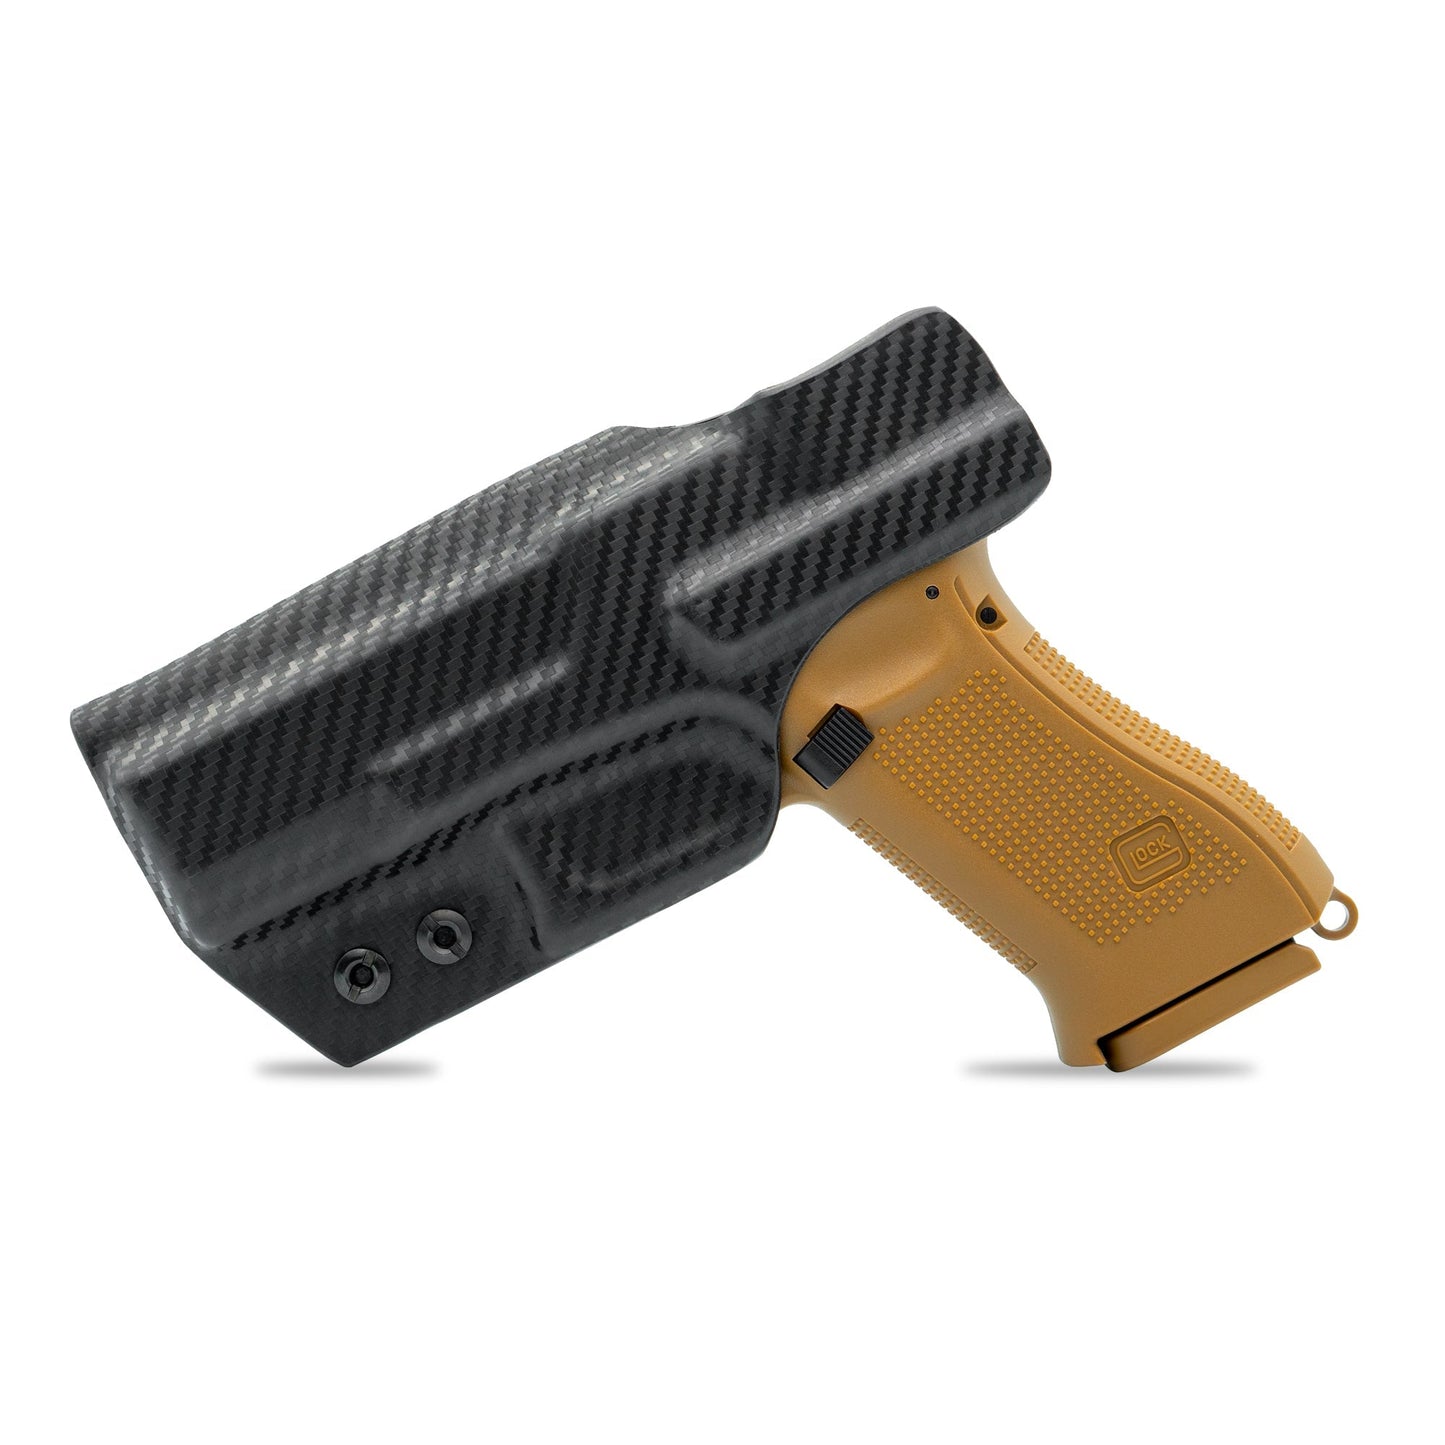 IWB Holster for the Walther PDP 4.5"